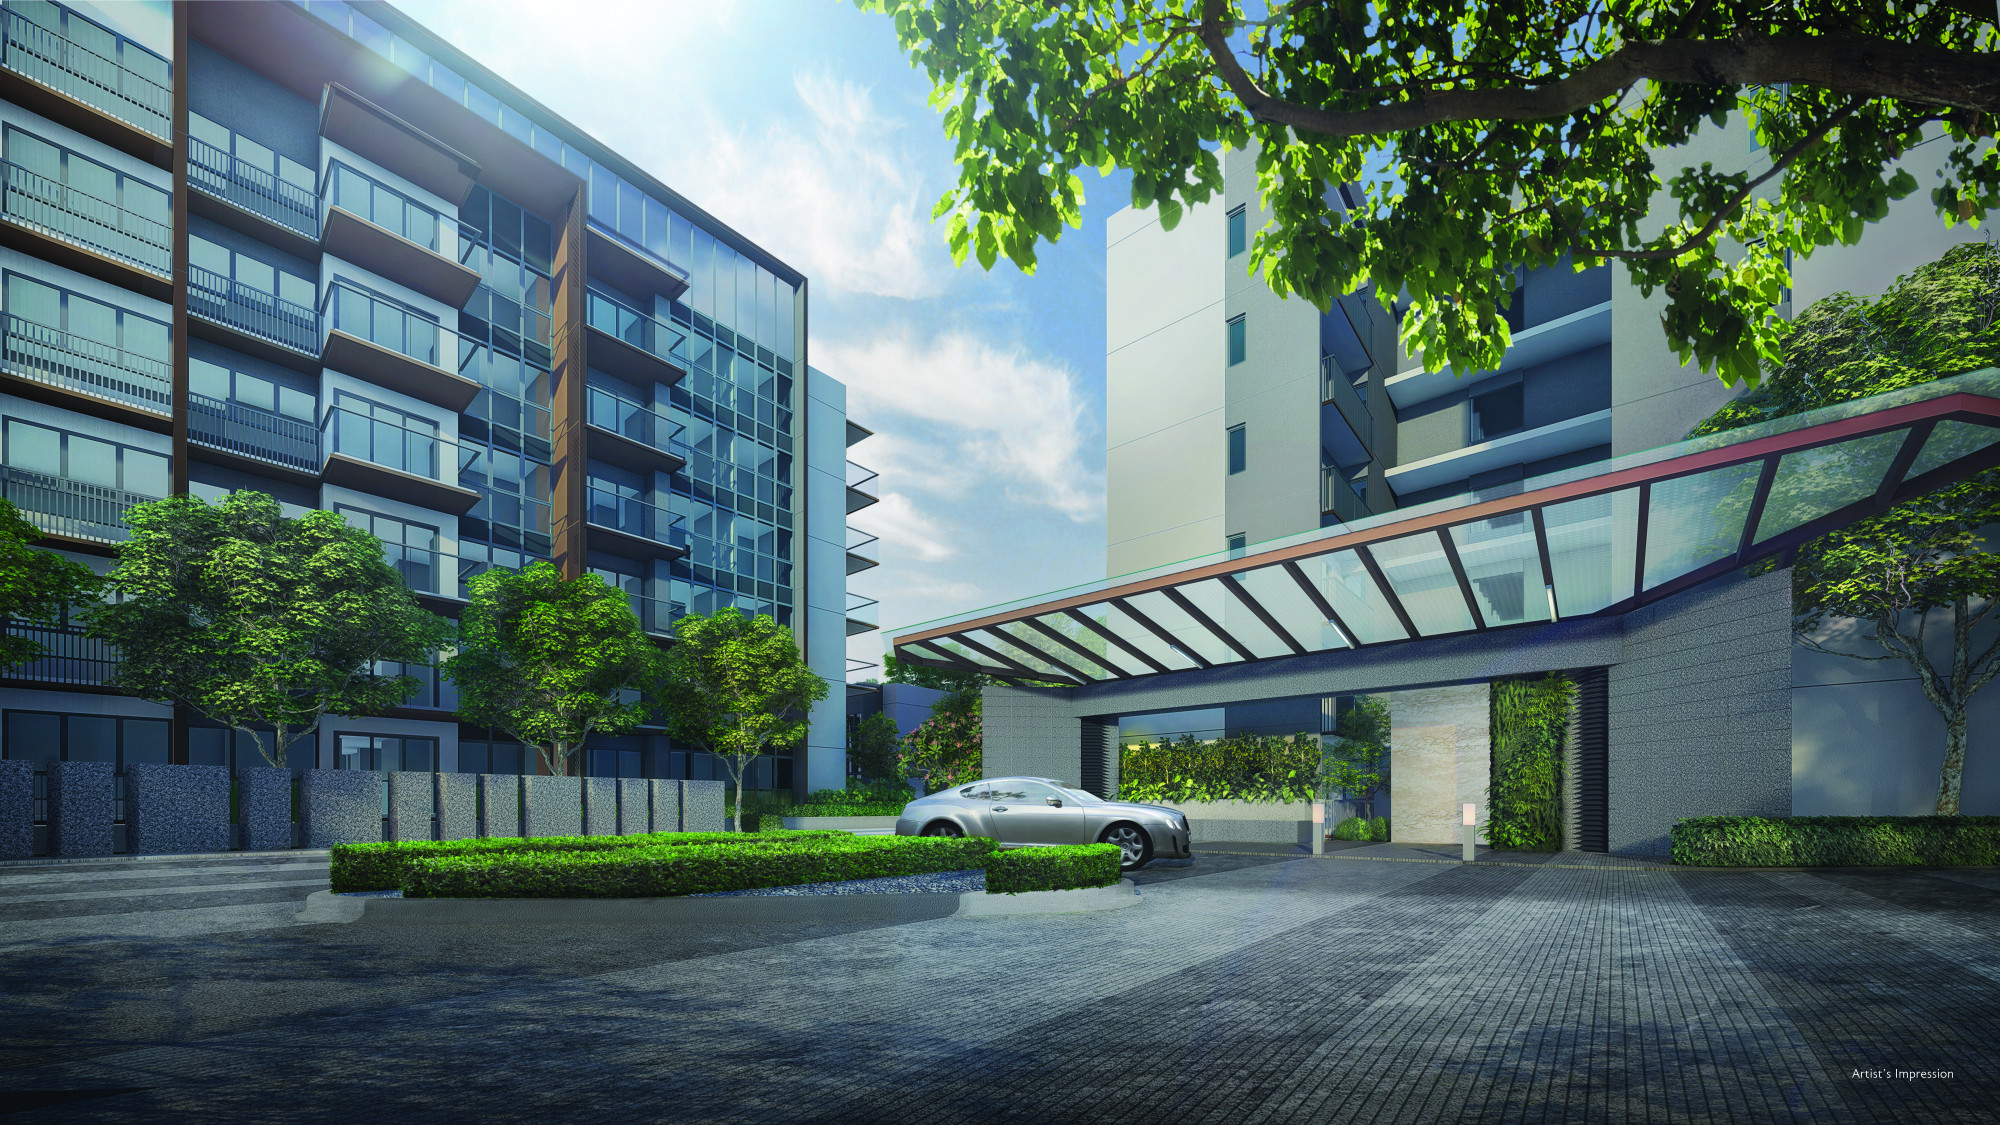 Fourth Avenue Residence Singapore, jc group properties